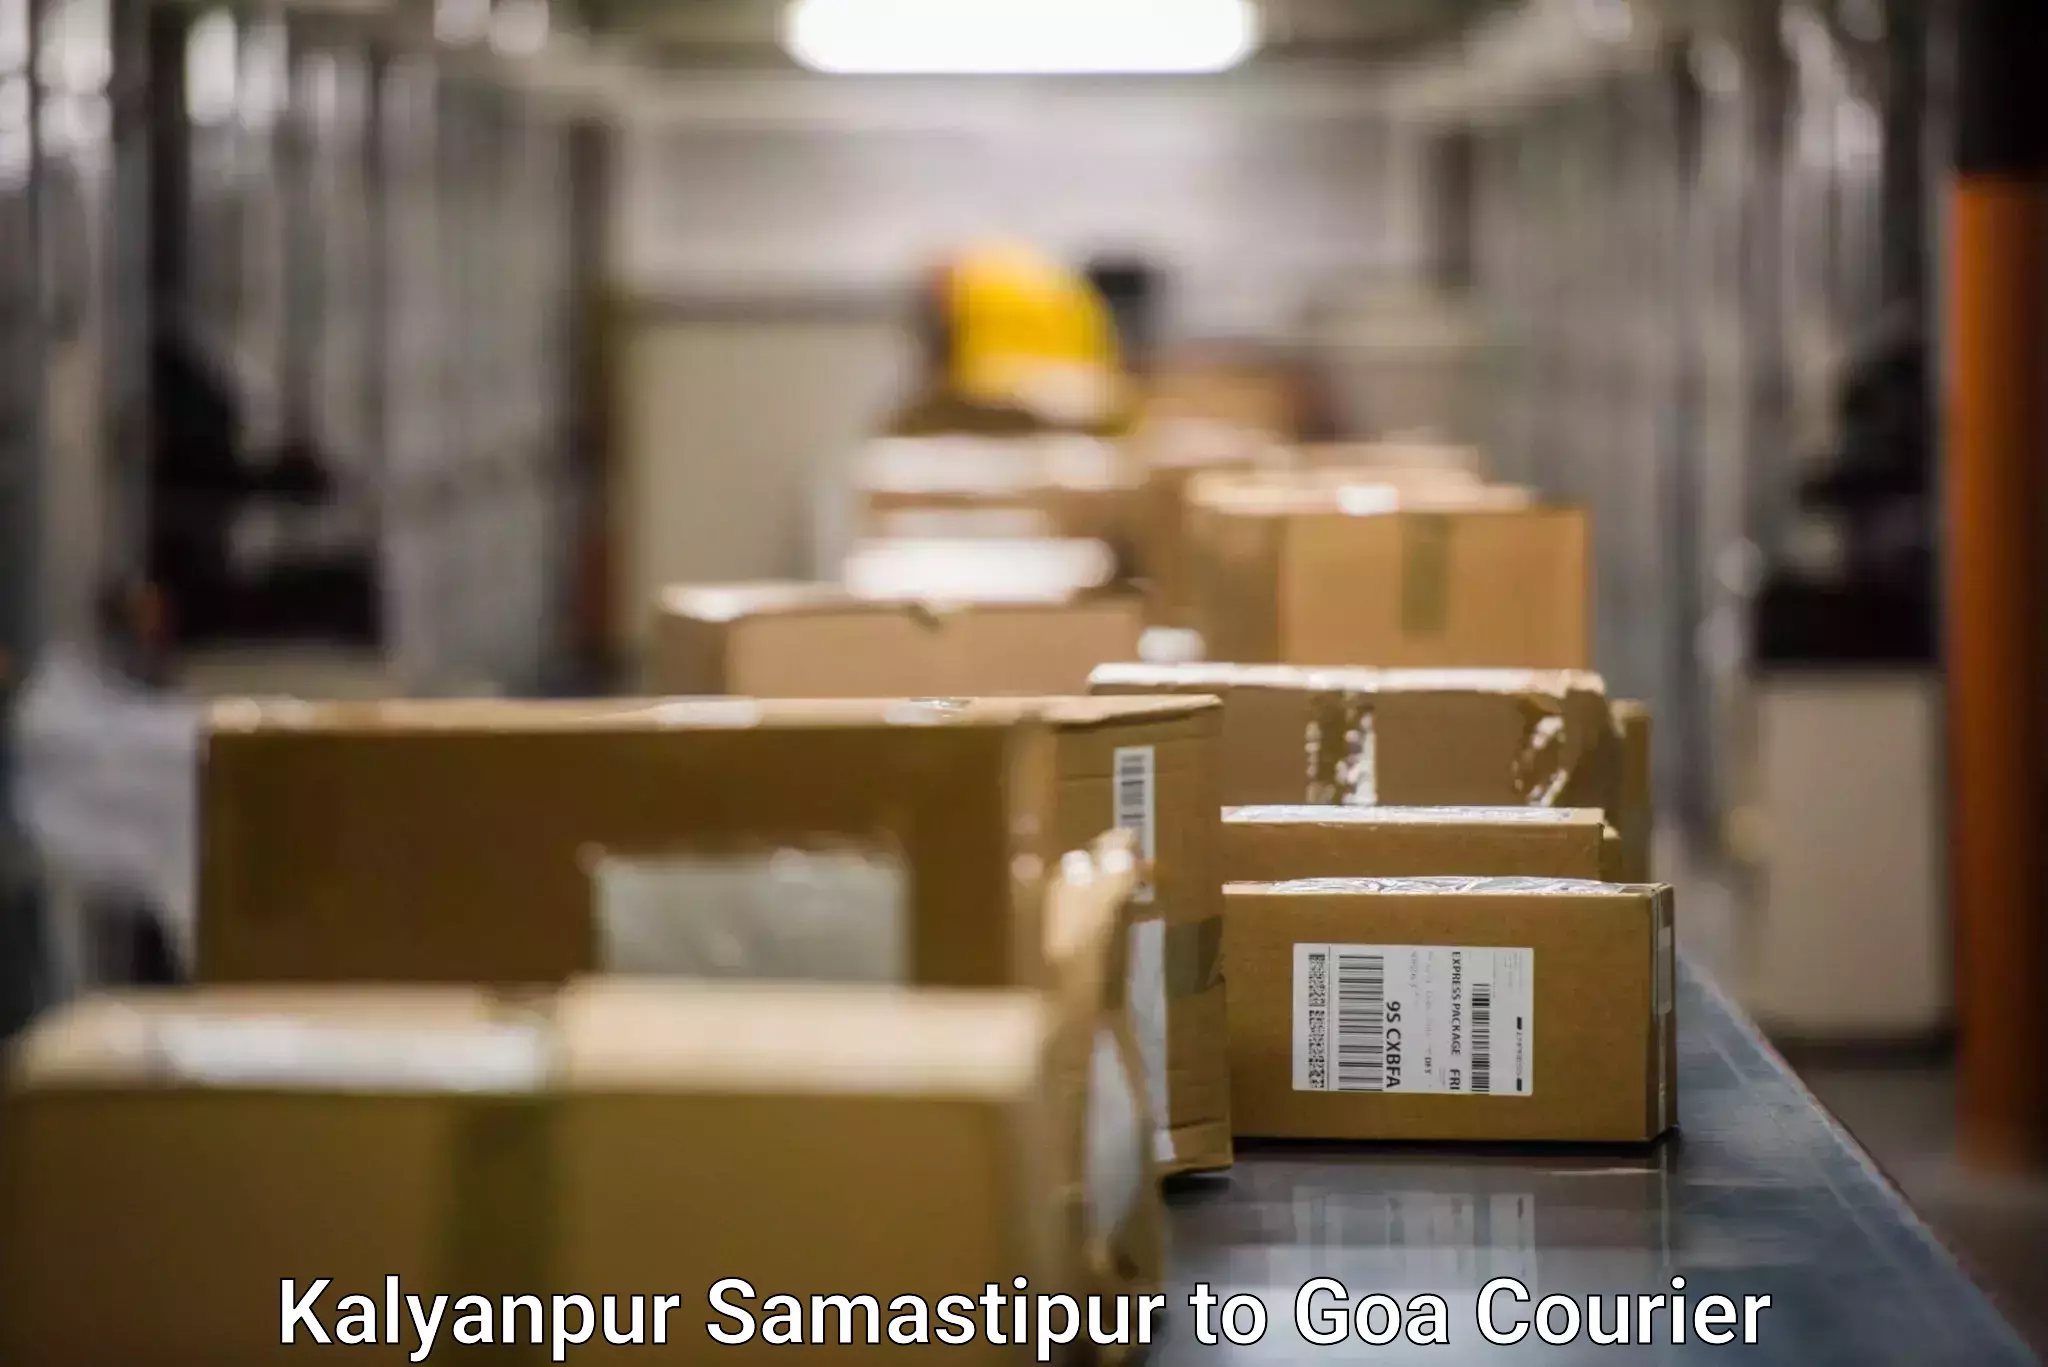 Same-day delivery solutions Kalyanpur Samastipur to Panjim